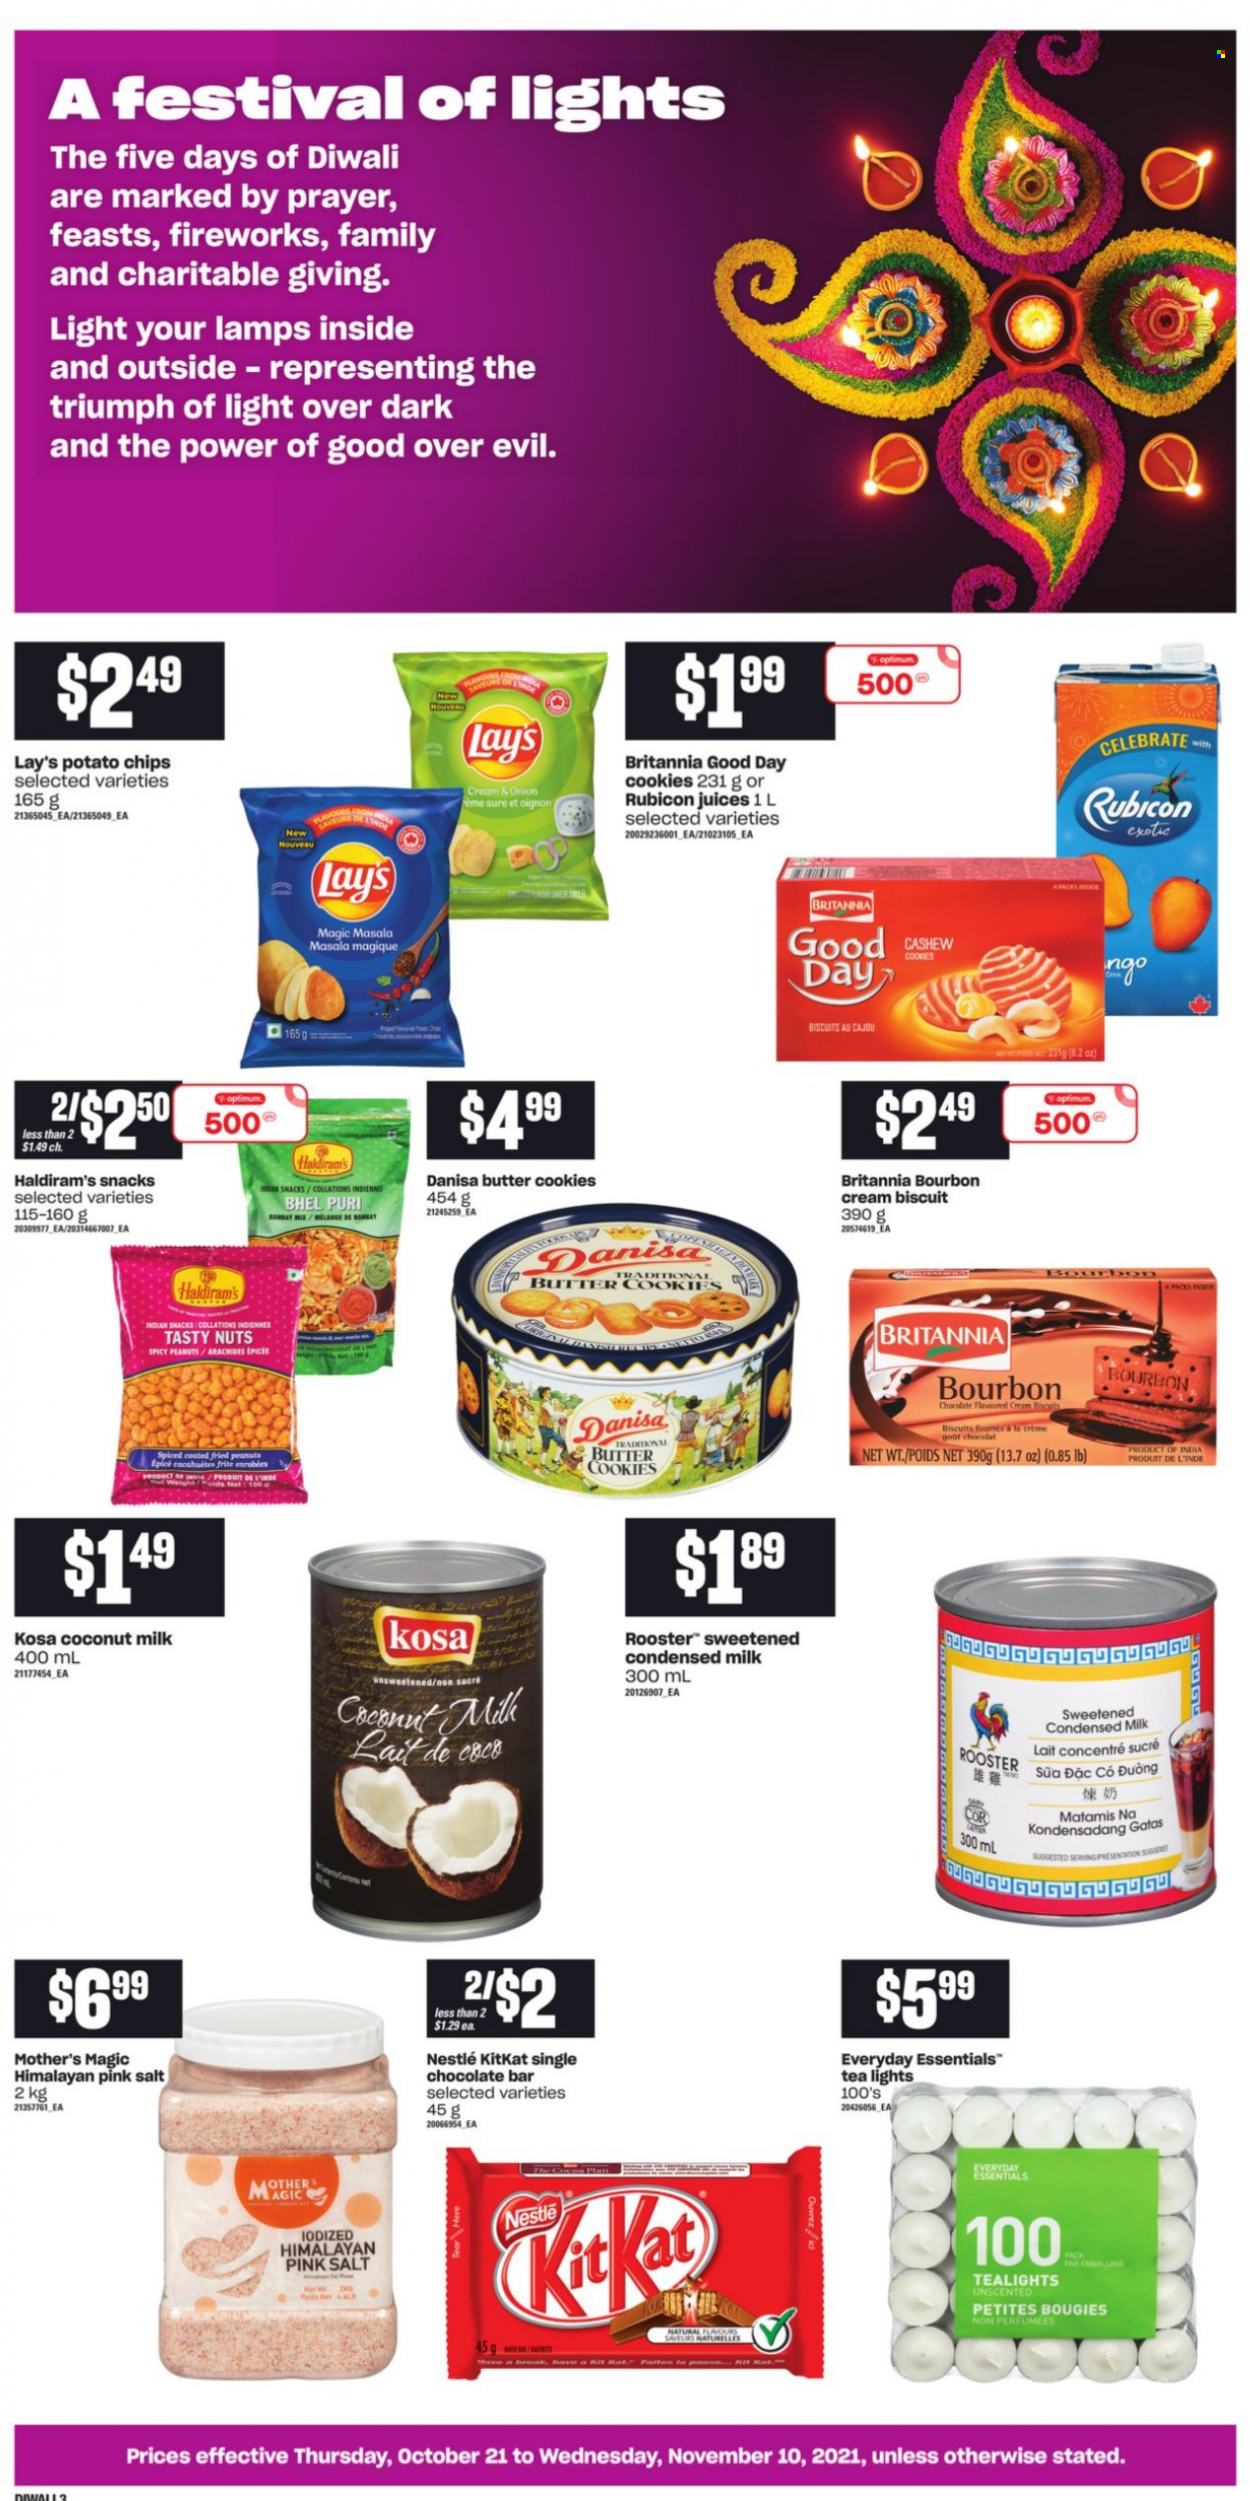 thumbnail - Loblaws Flyer - October 21, 2021 - November 10, 2021 - Sales products - condensed milk, cookies, butter cookies, snack, KitKat, biscuit, chocolate bar, potato chips, Lay’s, coconut milk, peanuts, juice, tea, bourbon, DAC, Sure, Optimum, Nestlé, chips. Page 3.